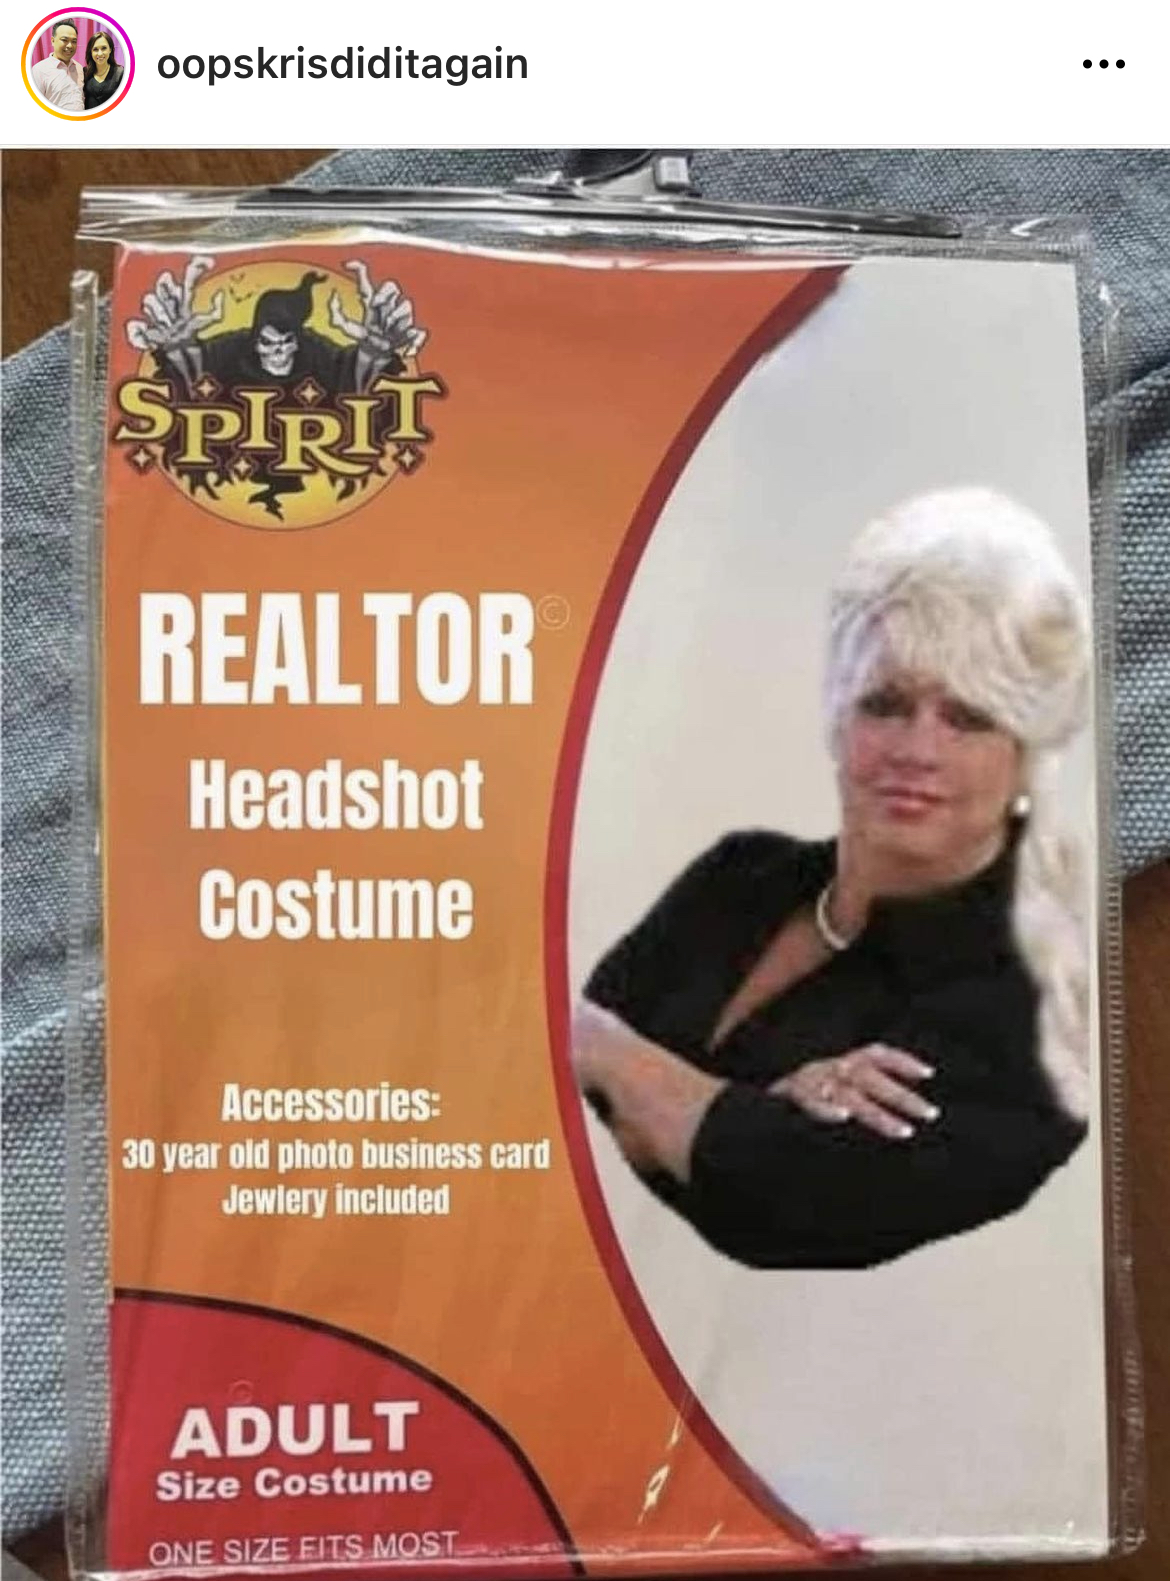 Costume Memes - spirit halloween - oopskrisdiditagain Spirit Realtor Headshot Costume Accessories 30 year old photo business card Jewlery included Adult Size Costume One Size Fits Most